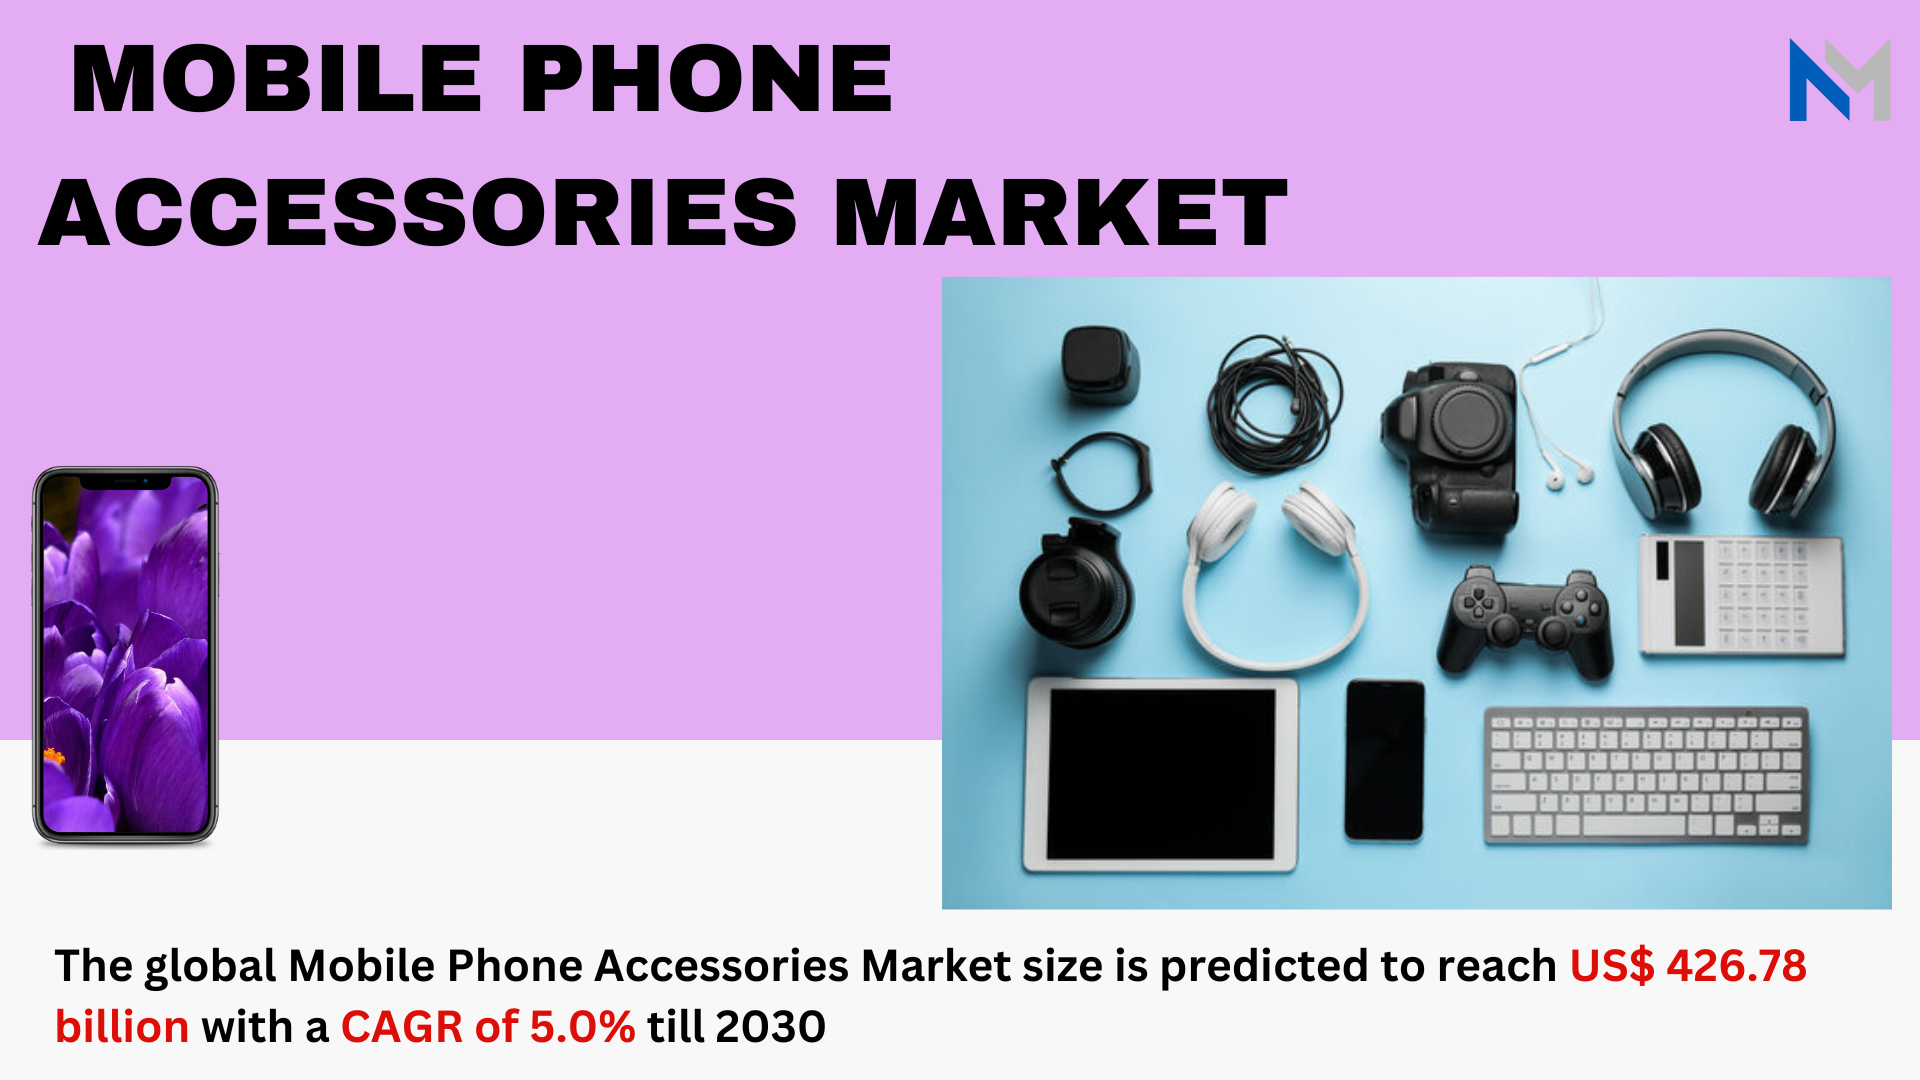 Mobile Phone Accessories Market to Generate USD